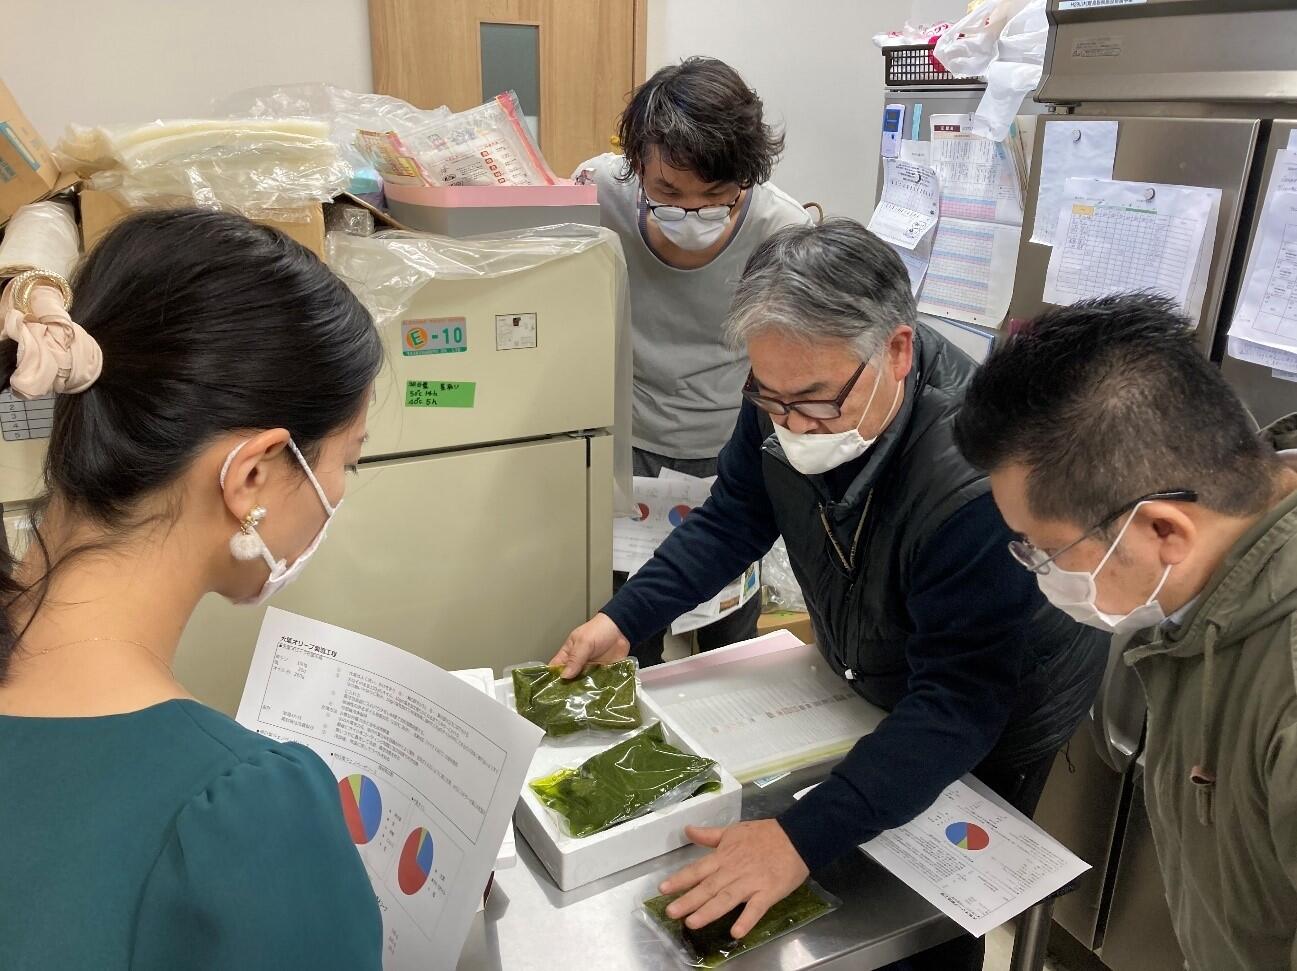 Attempting trial production of a product made by Toshima residents using Toshima ingredients